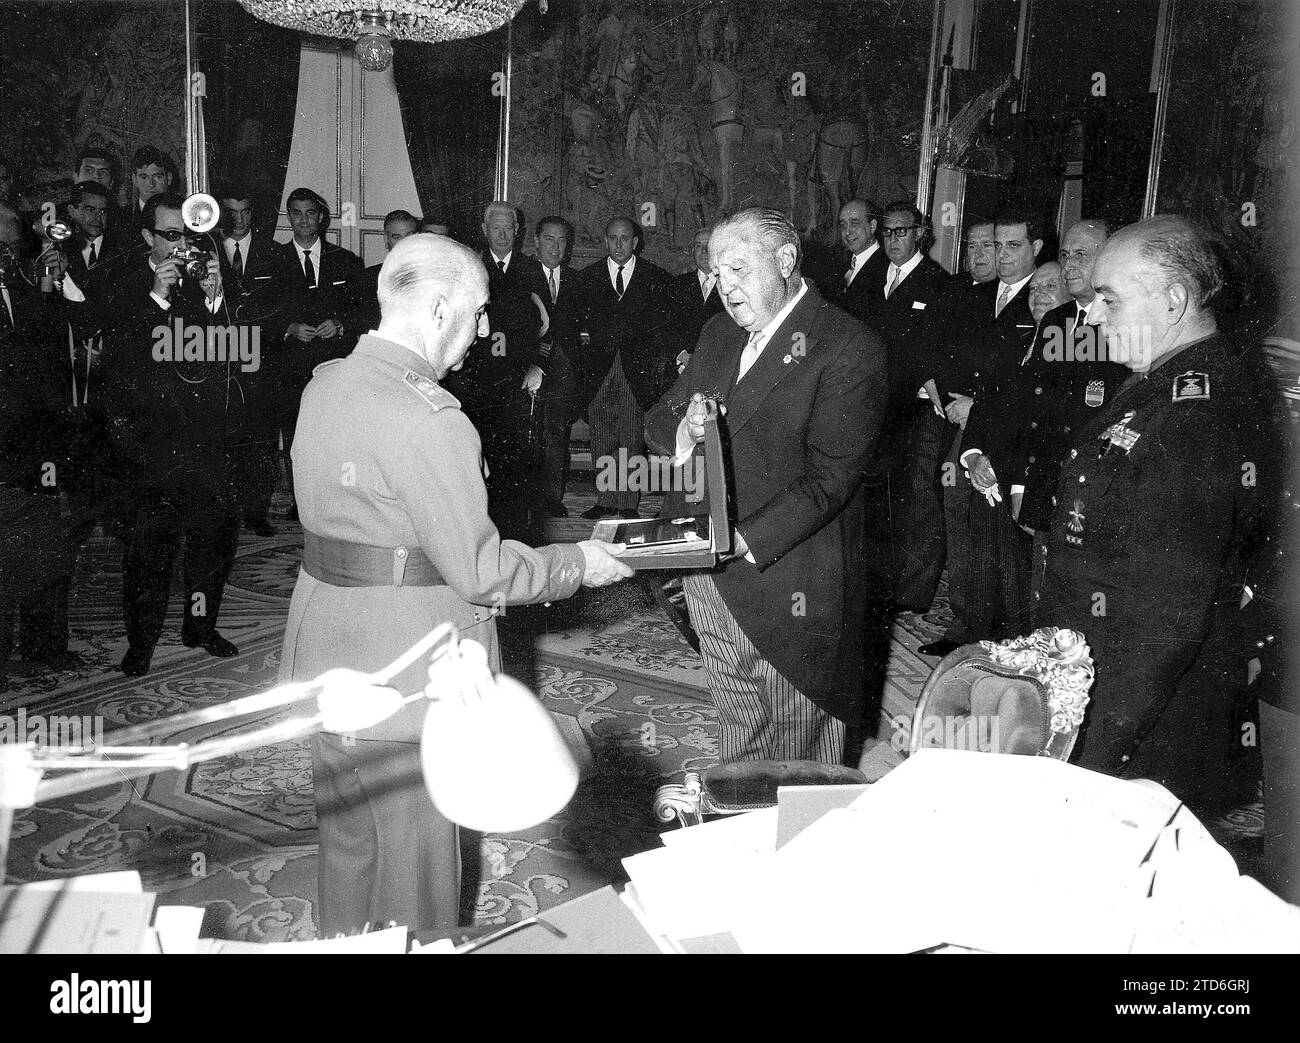 04/11/1967. Franco Receives Real Madrid Basketball, European Champion, in the Pardo, Chaired by Bernabeú and Accompanied by the Minister Secretary of the Movement, Mr. Solís, and the National Sports Delegate Samaranch, in the image Santiago Bernabeú presents a plaque to Franco. Credit: Album / Archivo ABC / Manuel Sanz Bermejo Stock Photo